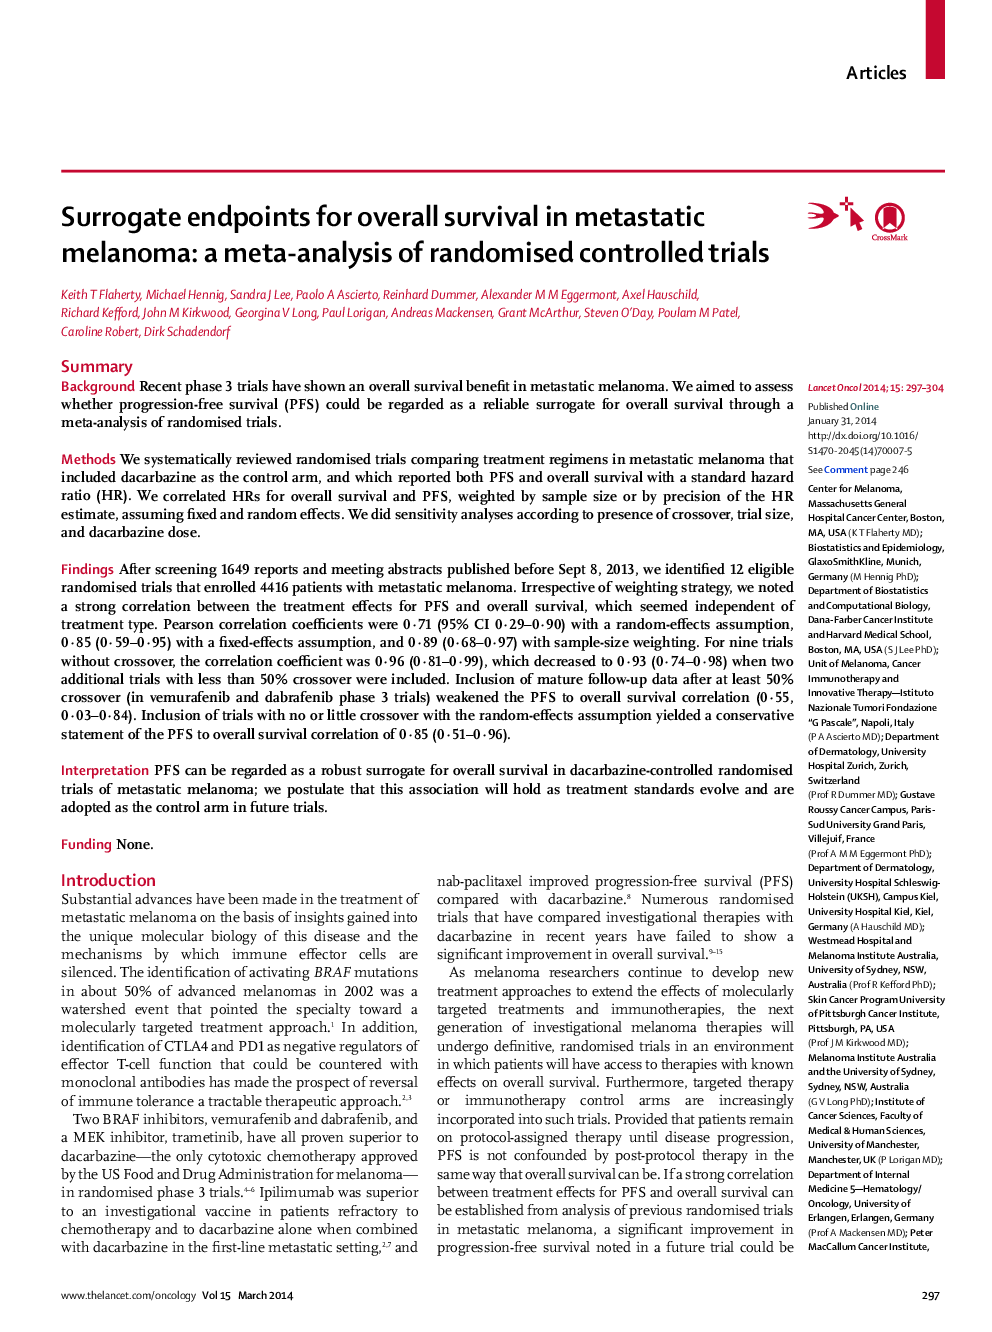 Surrogate endpoints for overall survival in metastatic melanoma: a meta-analysis of randomised controlled trials